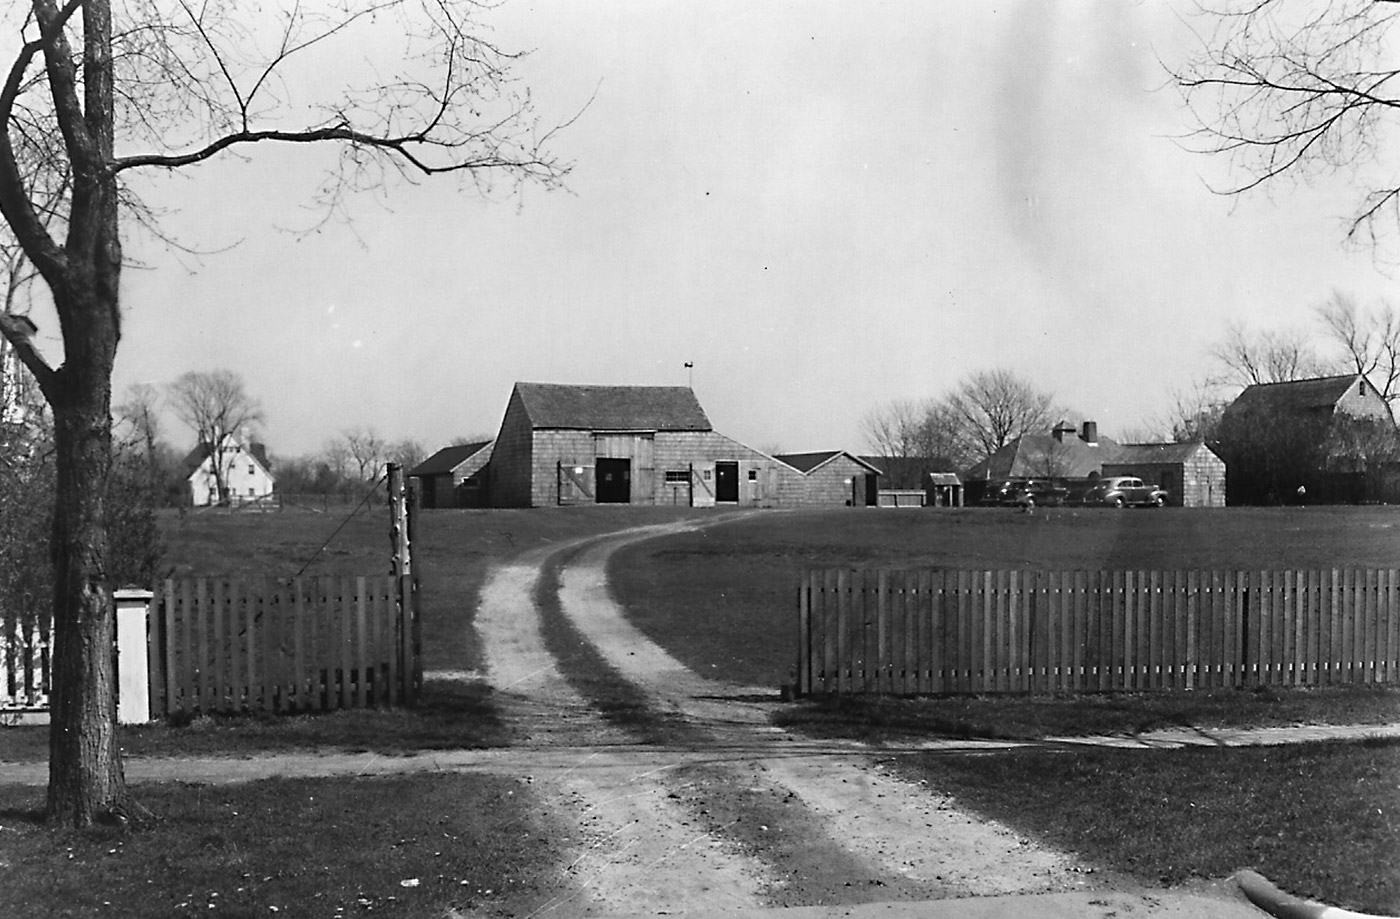                             A view of the farm from James Lane in 1947